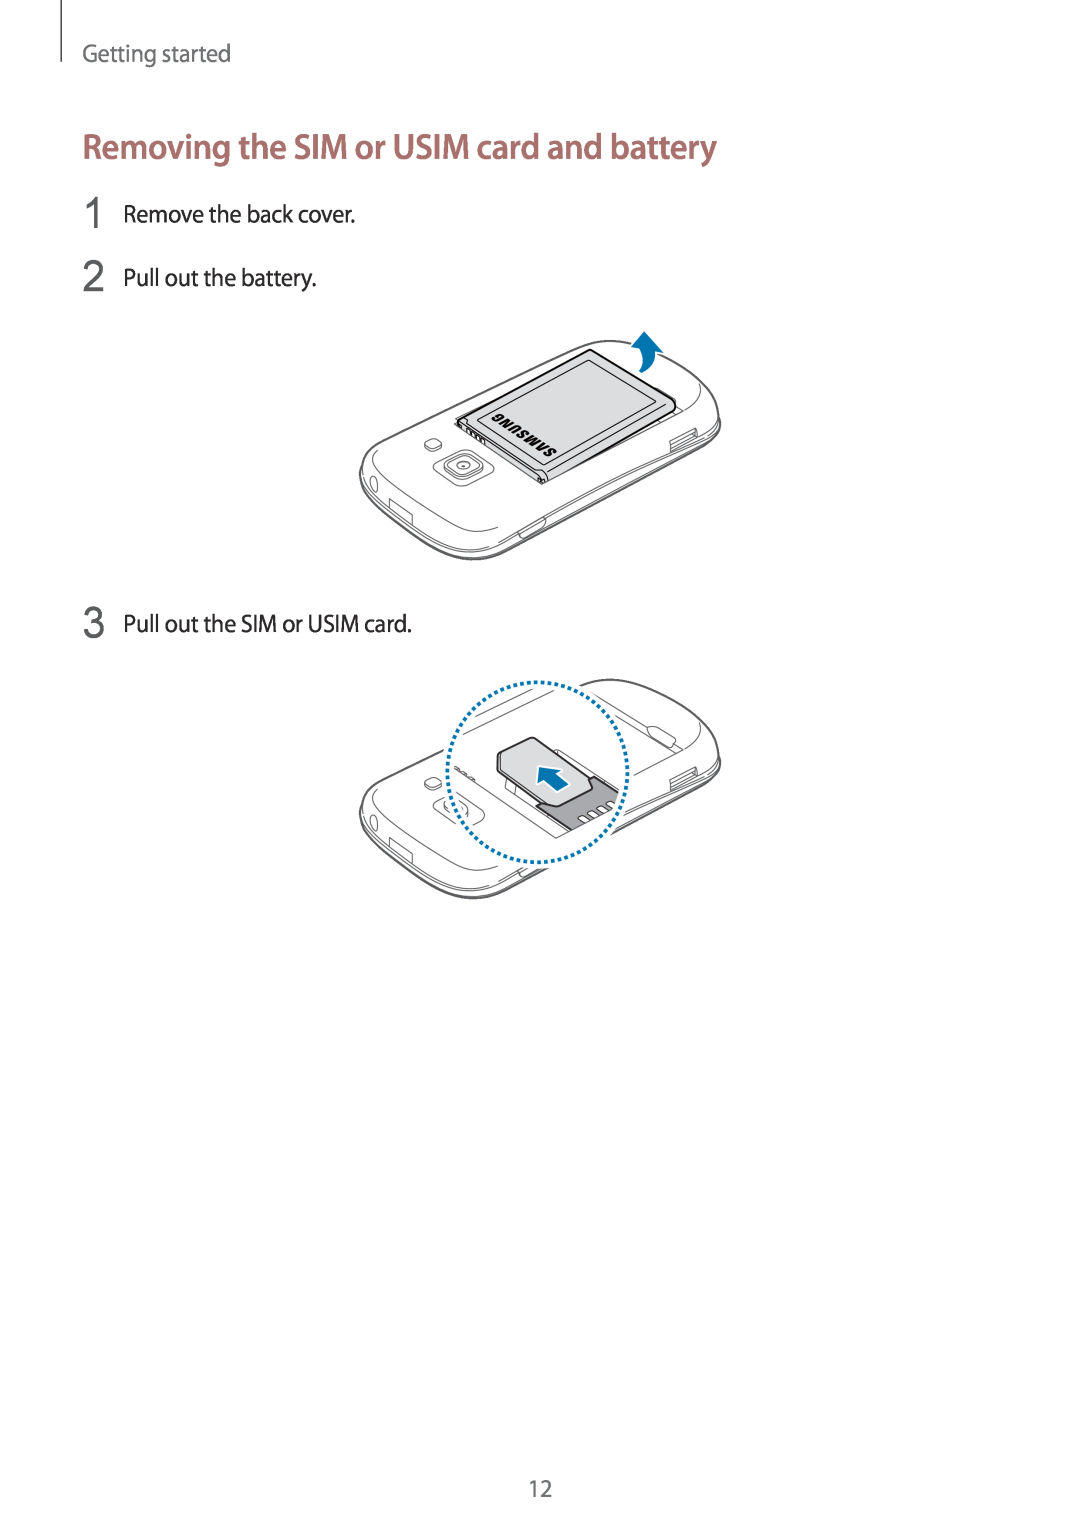 Samsung GT-S6810MBNCOS manual Removing the SIM or USIM card and battery, Getting started, Pull out the SIM or USIM card 